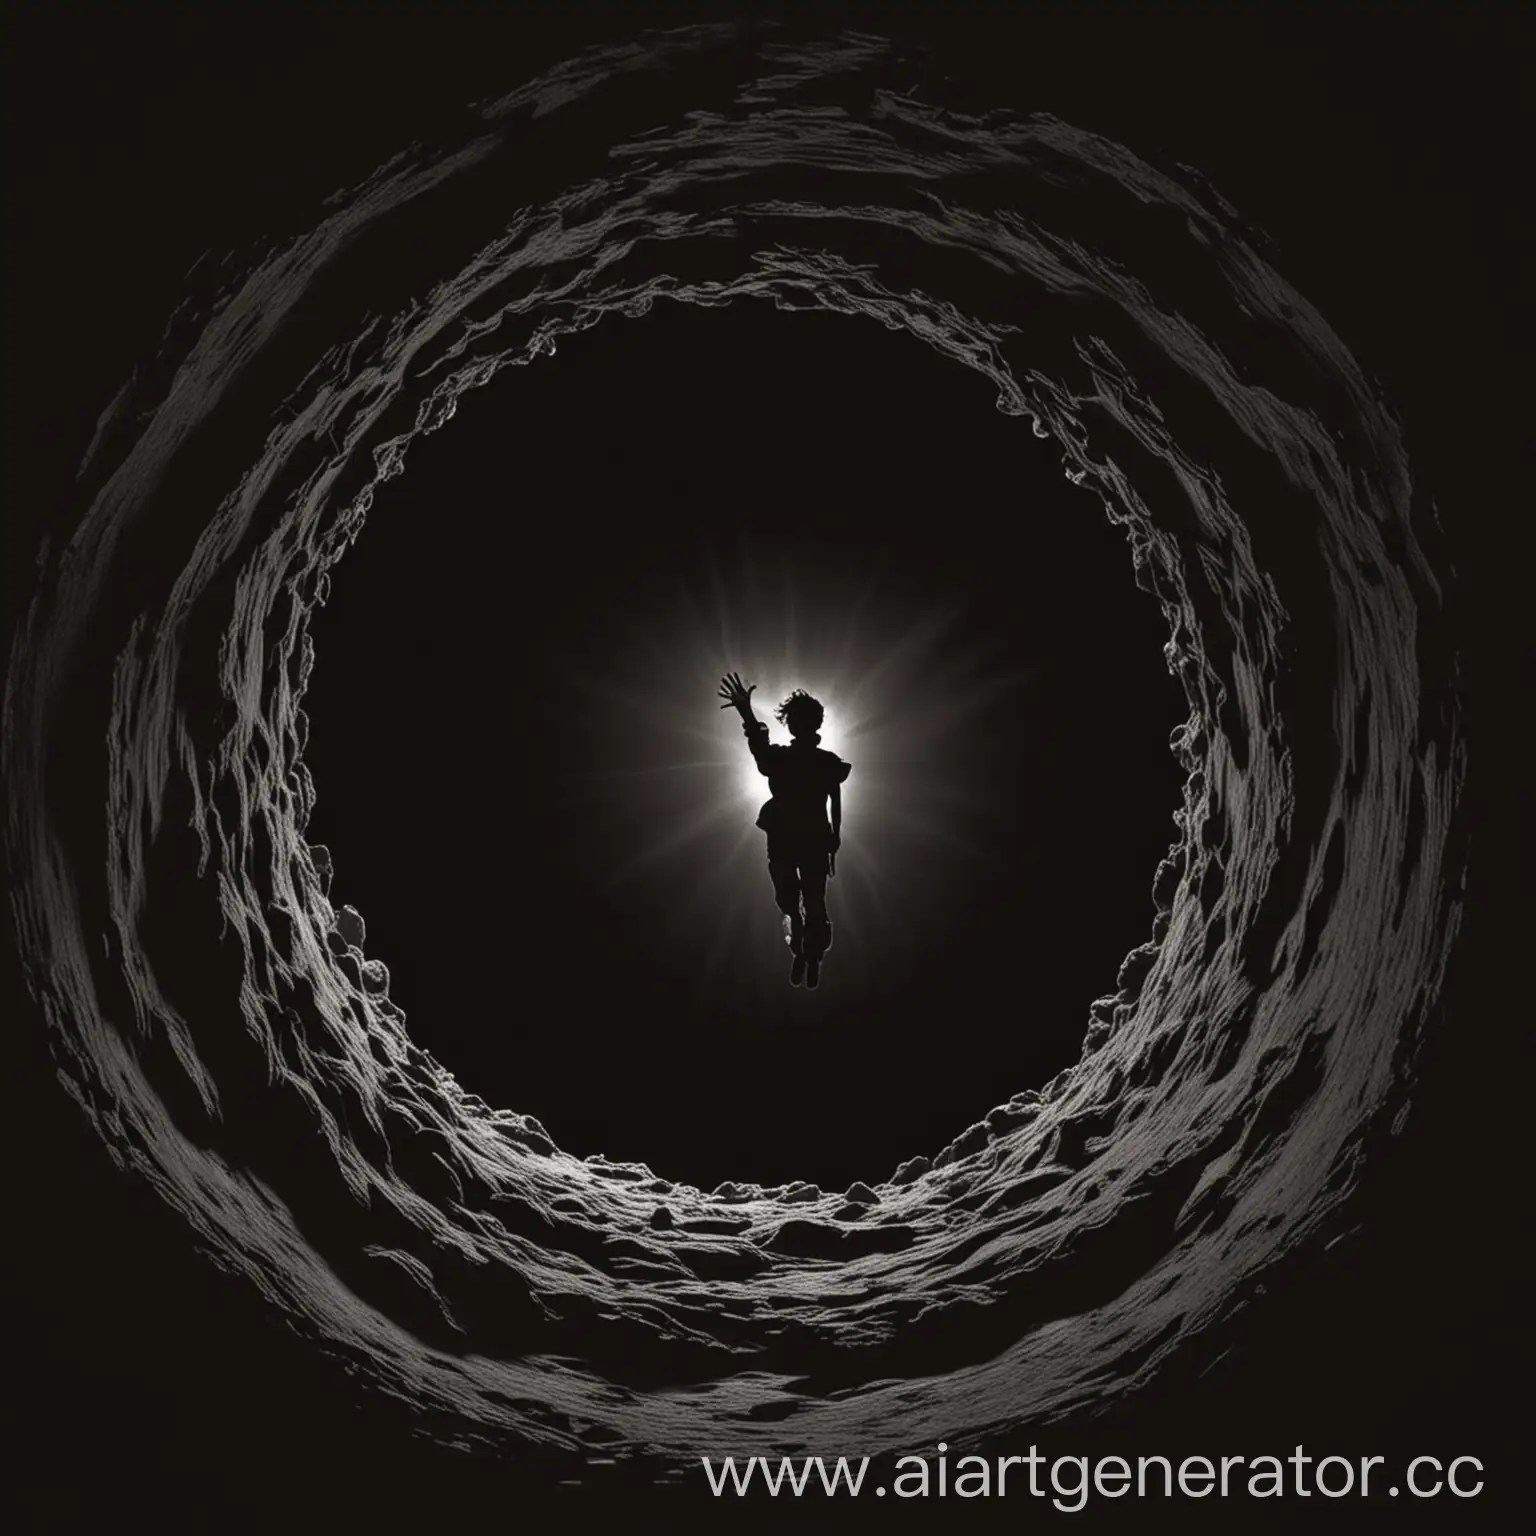 Person-Silhouette-Falling-into-Black-Hole-Reaching-Out-in-Desperation